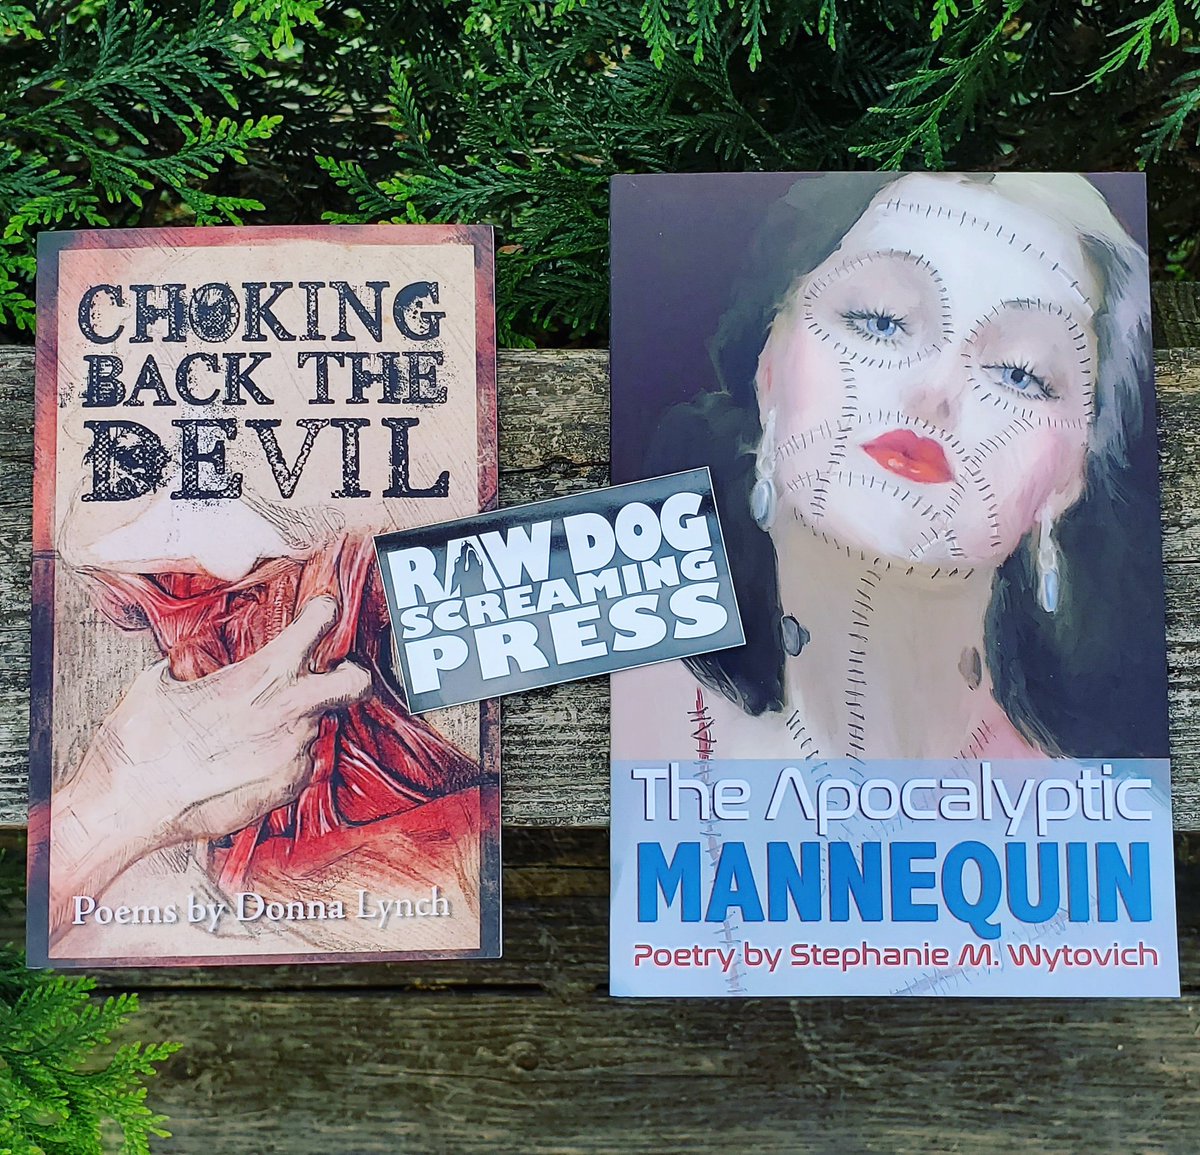 Yesterday's poetry #bookmail from @RDSPress. Choking Back the Devil by @GeekLioness & The Apocalyptic Mannequin by @SWytovich. I bought these as part of Raw Dogs 2 for 1 sale. Excited to read some more #horrorpoetry.